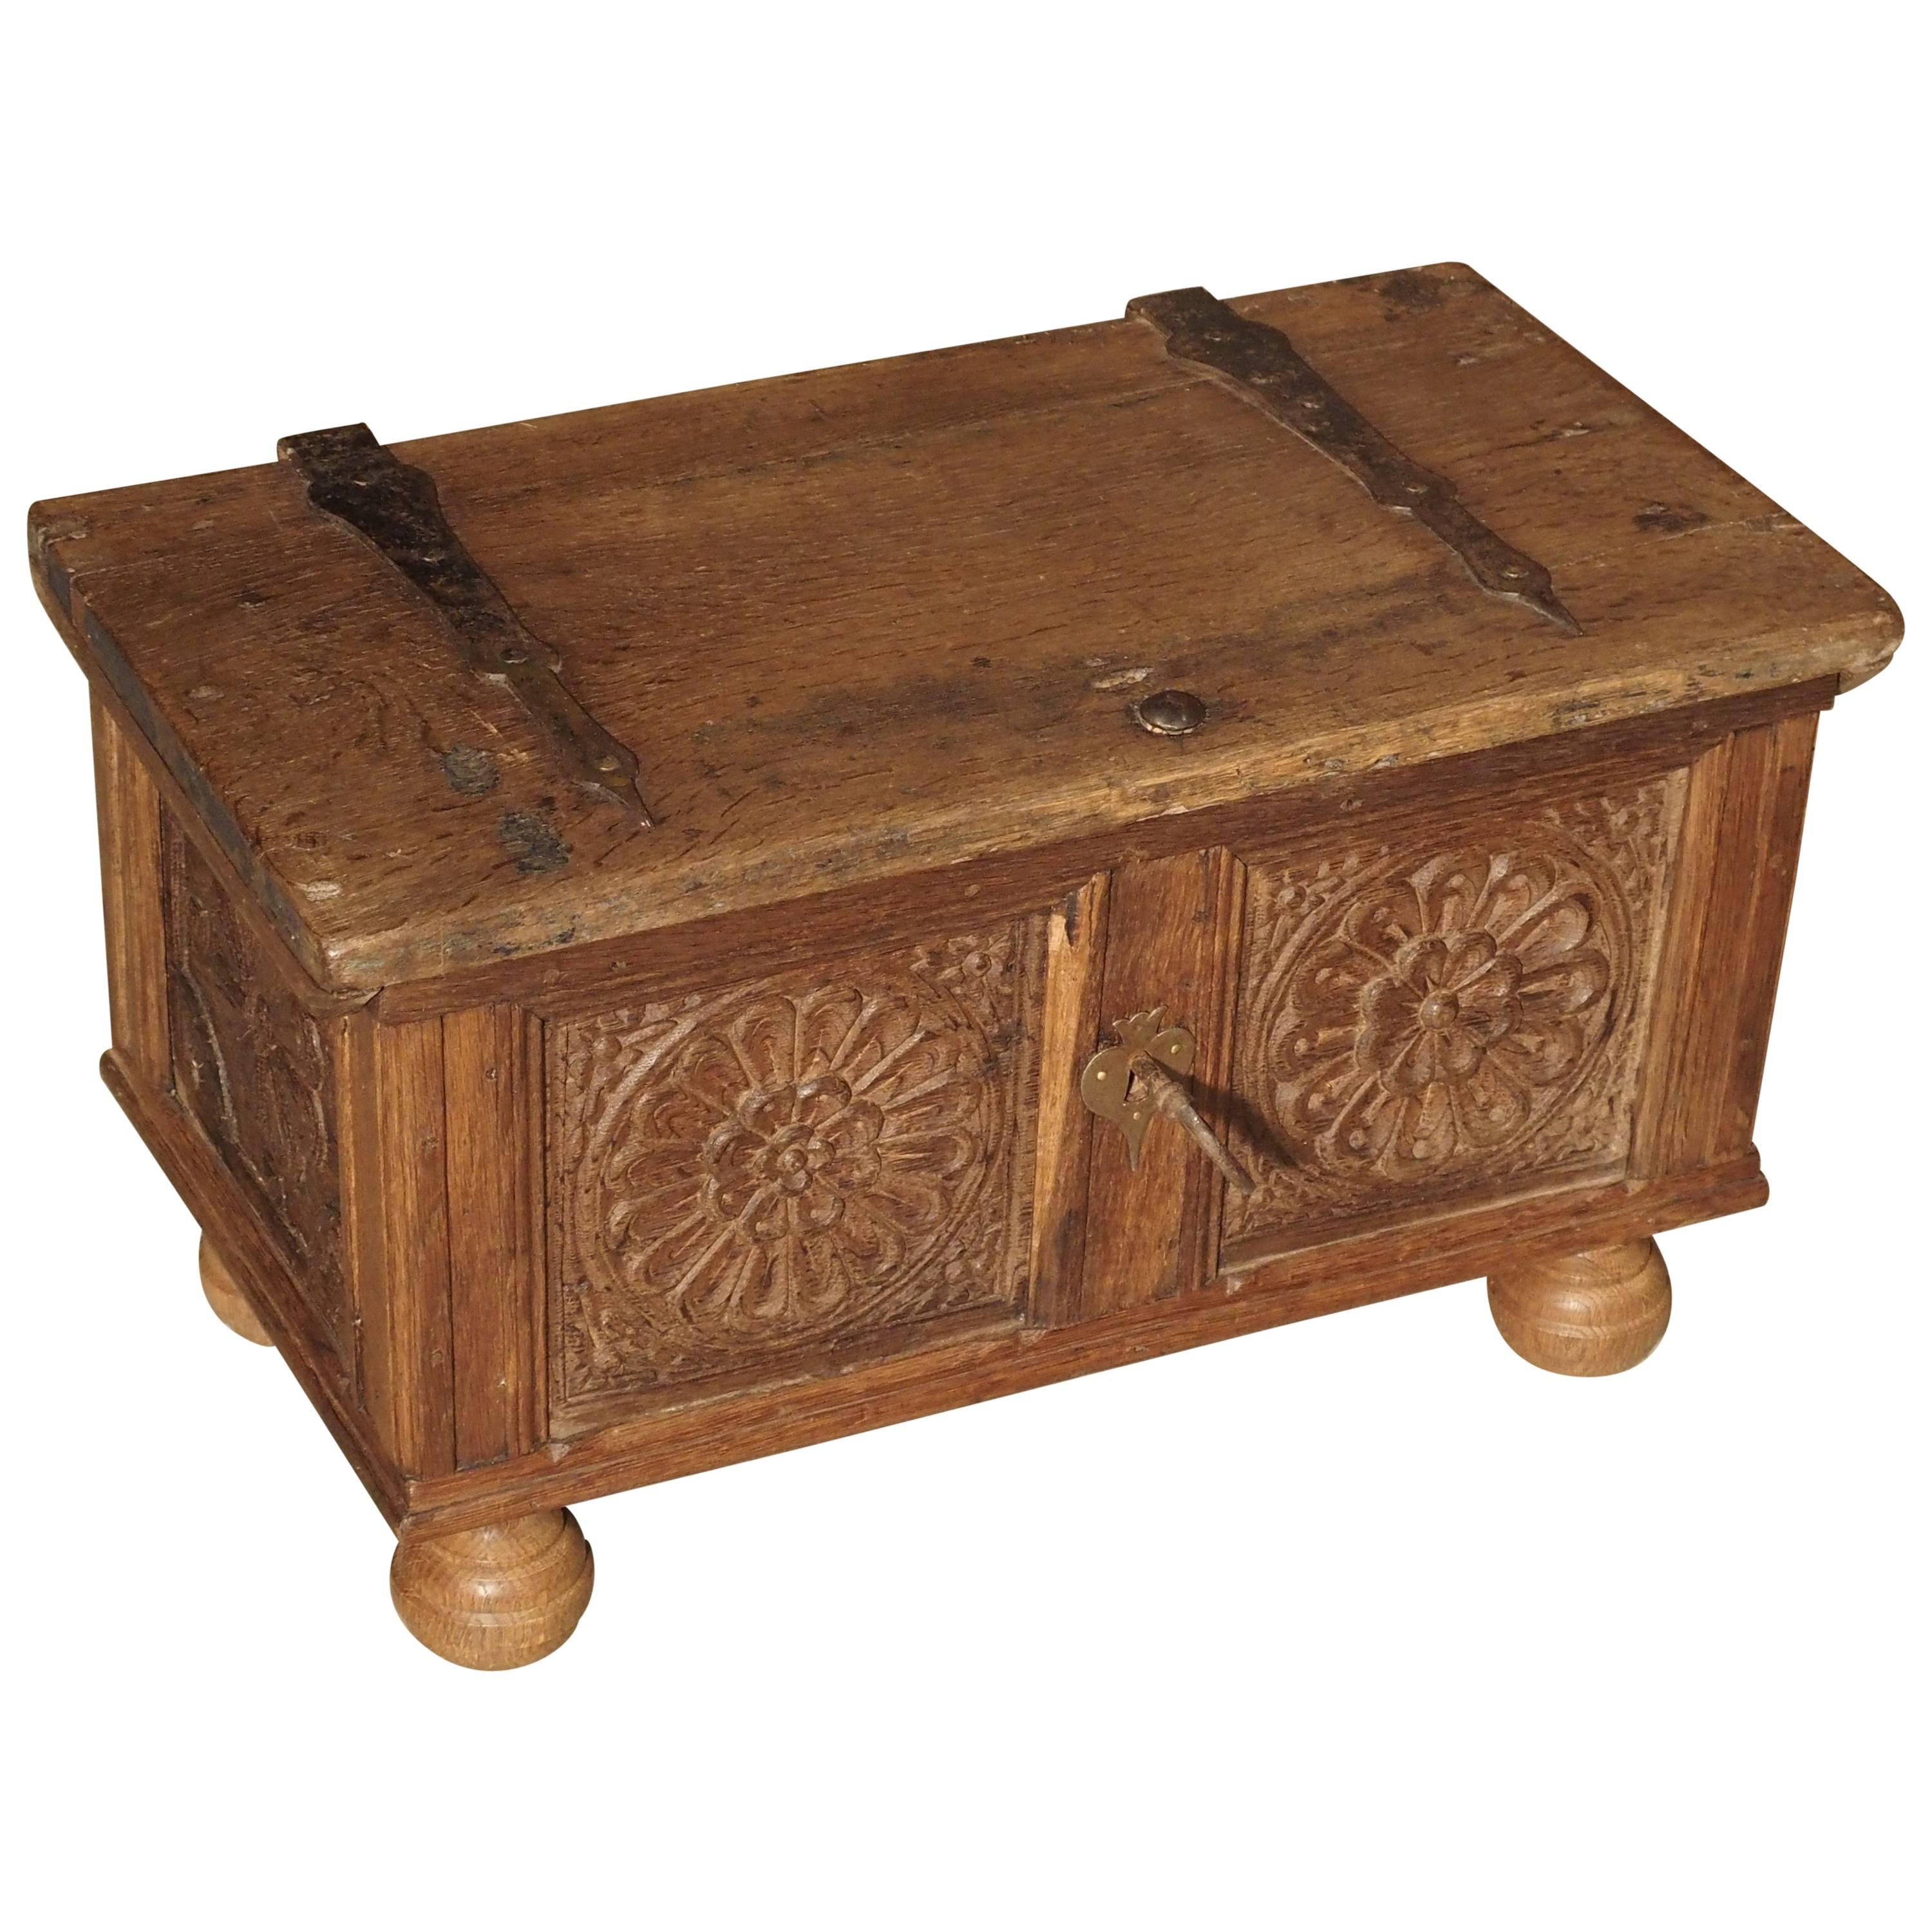 Small Antique Oak Table Trunk from Spain, 17th Century